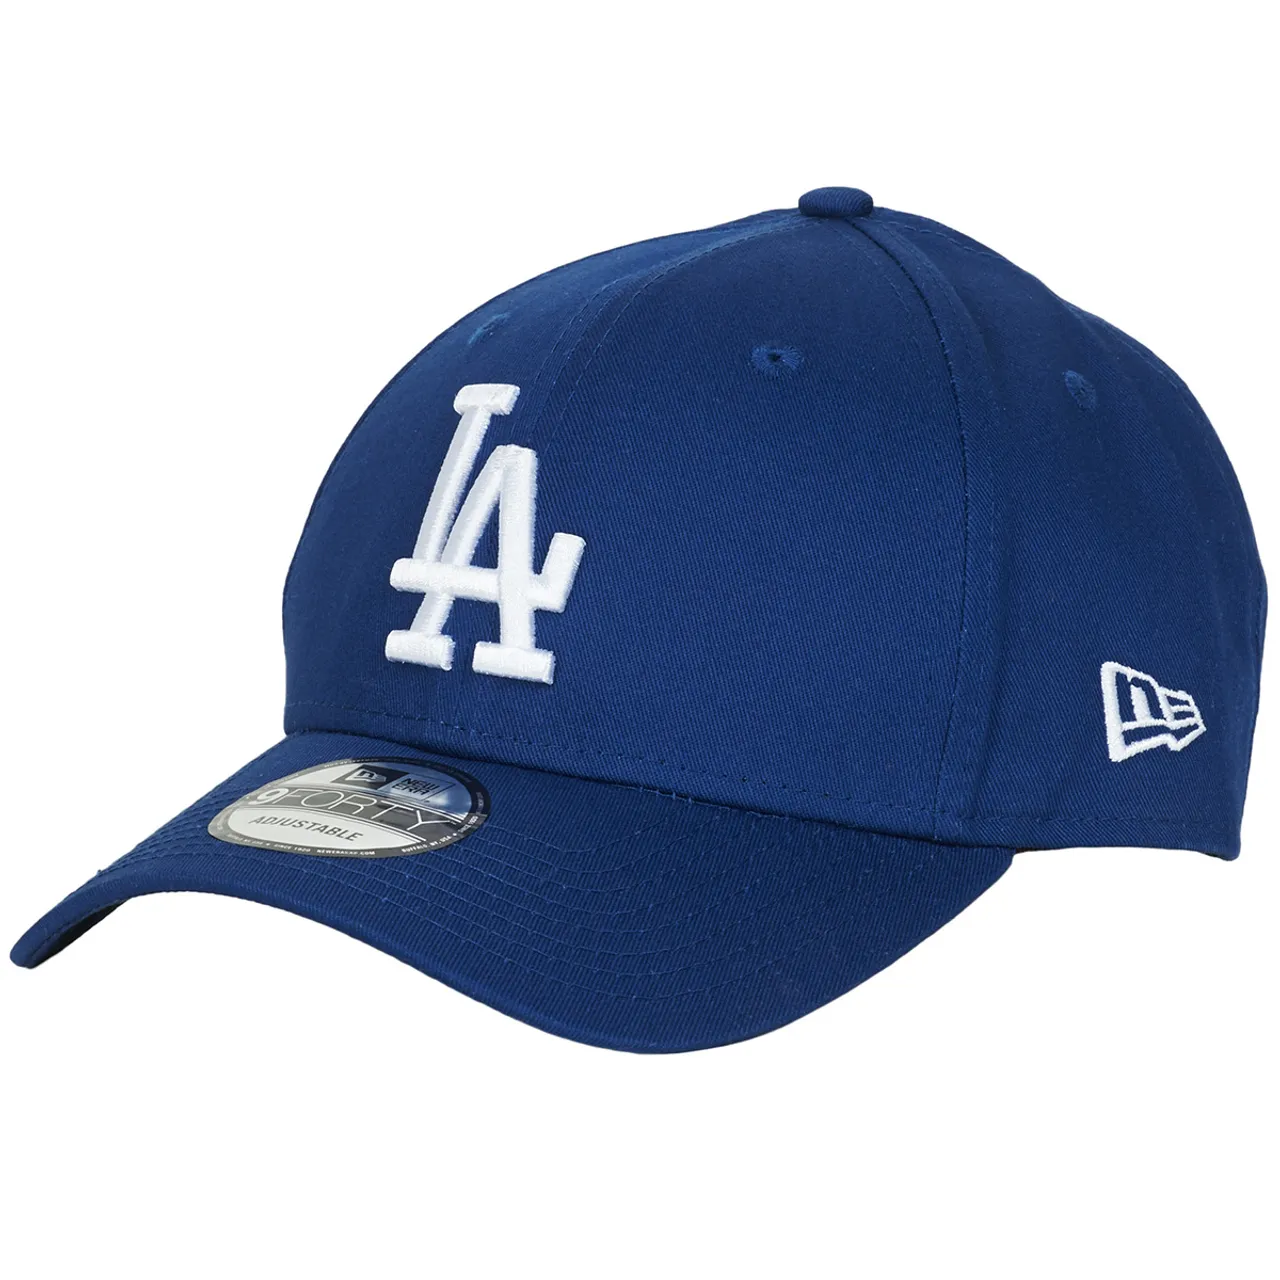 New-Era  LEAGUE ESSENTIAL 9FORTY LOS ANGELES DODGERS  women's Cap in Blue